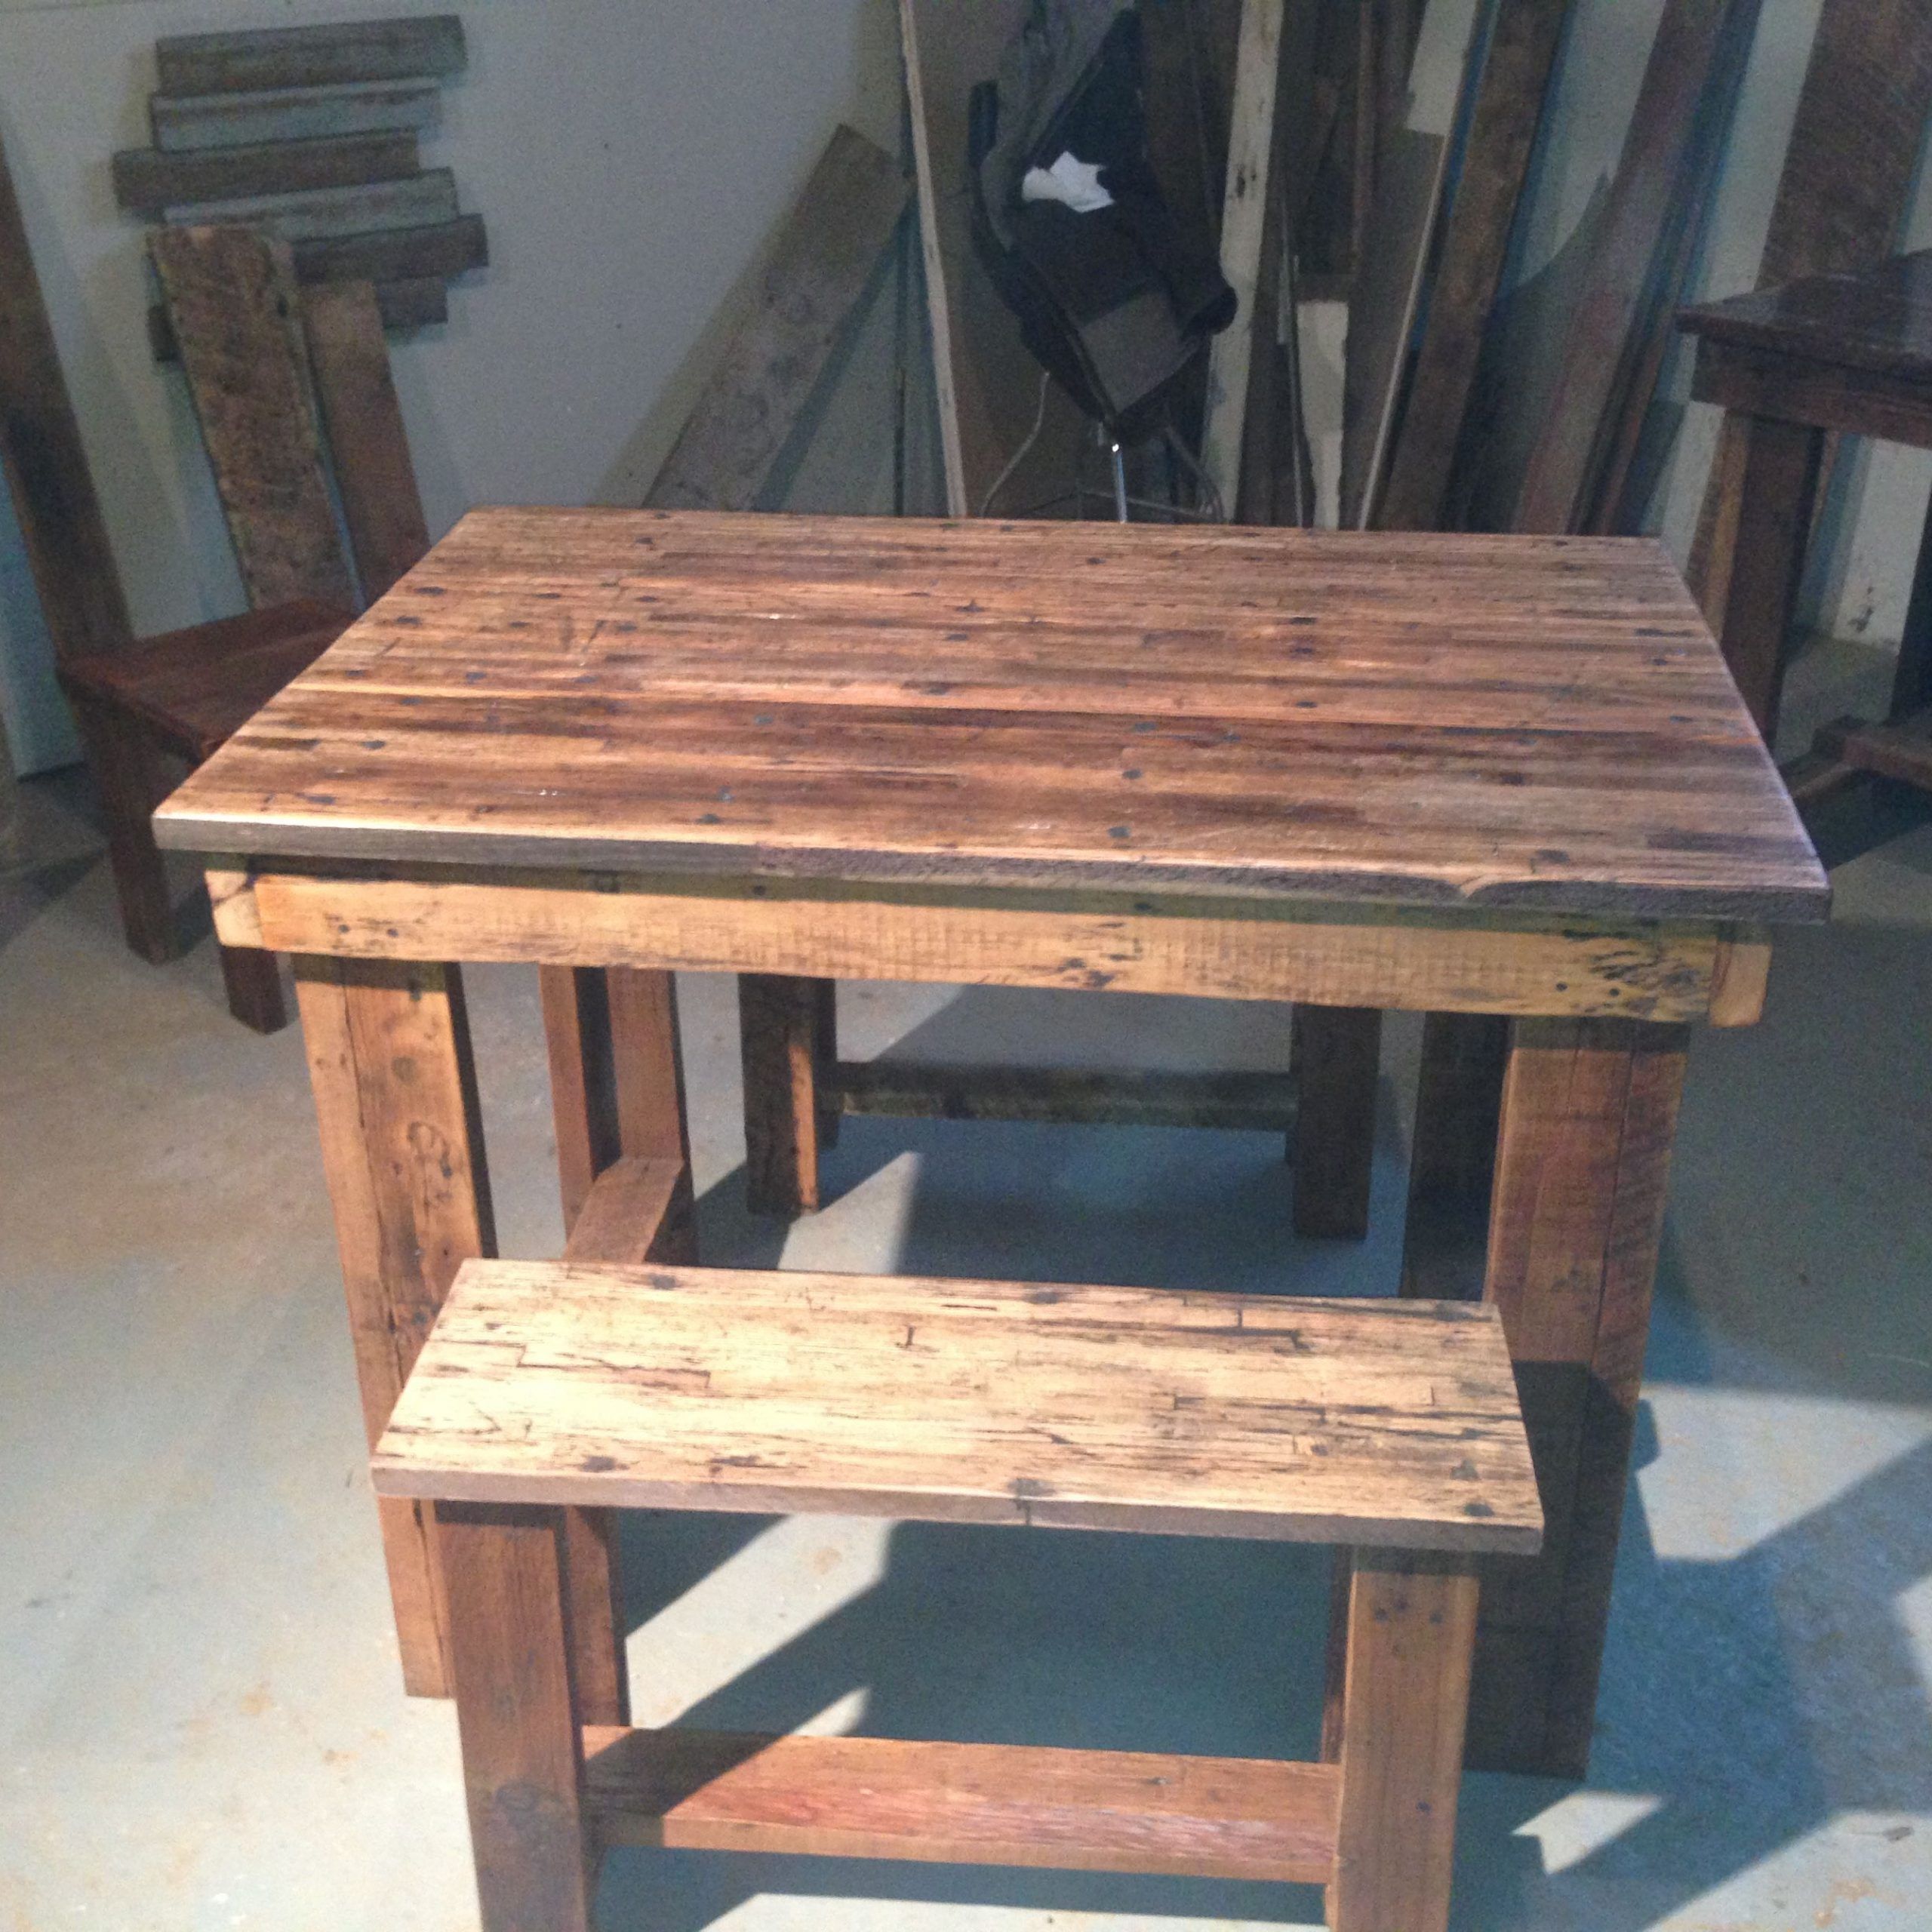 Table And Benches Made From Old Tractor Trailer Flooring Throughout Most Recent Herran Dining Tables (View 16 of 25)